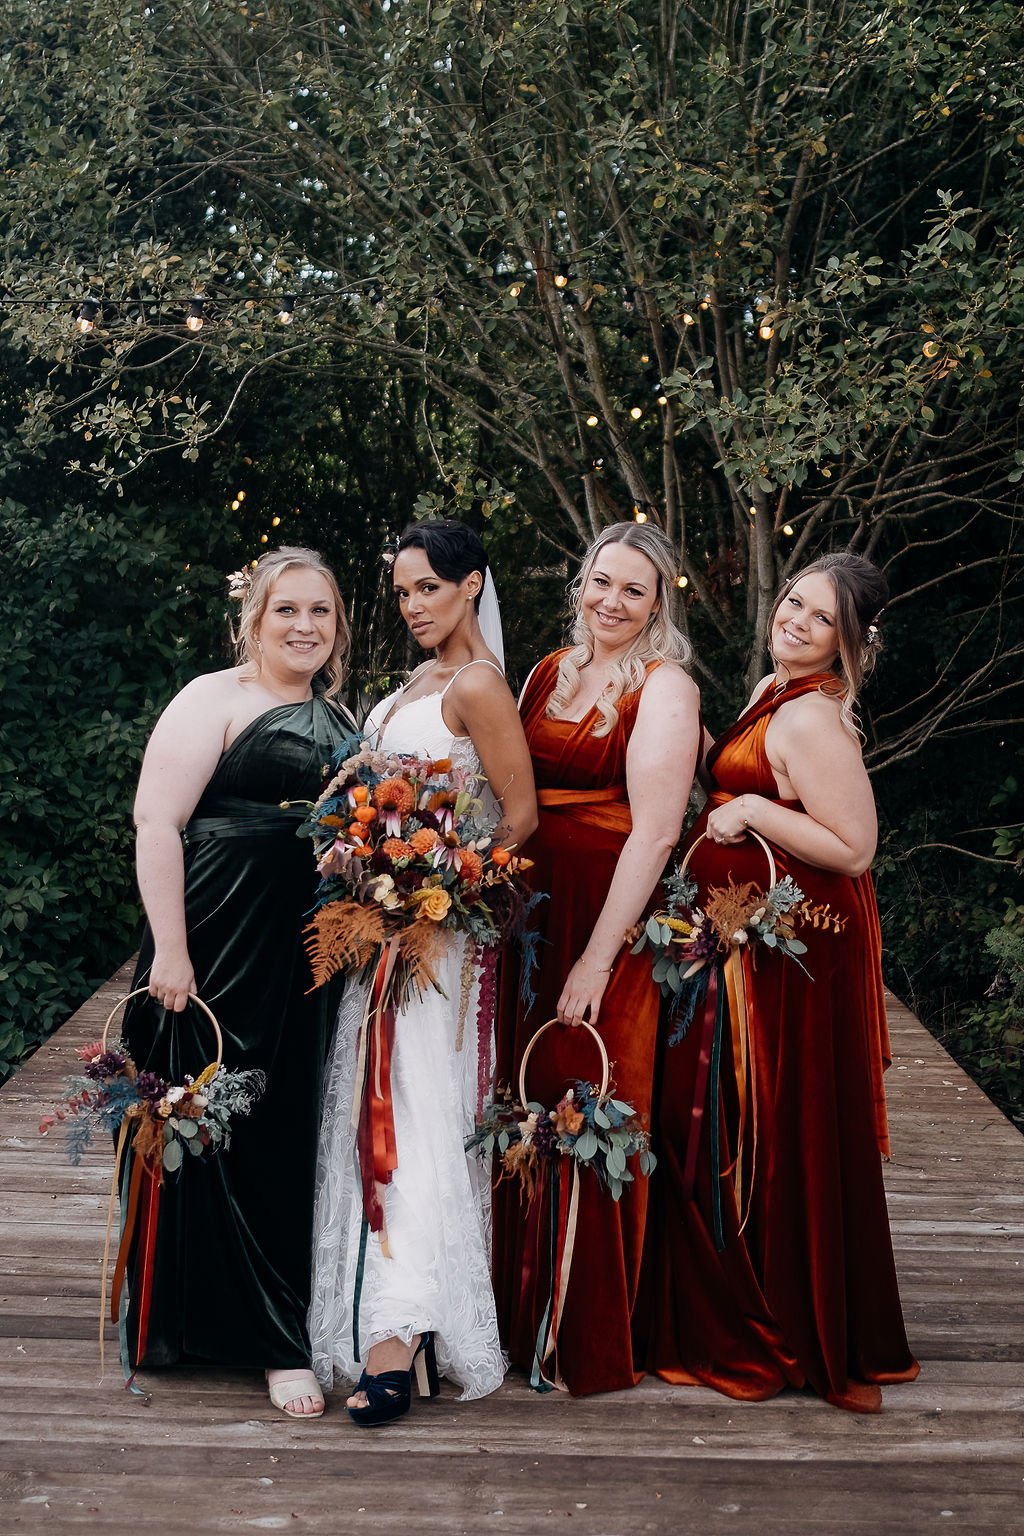  Bride is stood holding her autumnal coloured, hand-tied wedding bouquet. The quirky, modern florists have used lots of different florals, textures and foliage to create the shape and interest. The cool florists have reflected the bridal bouquet in t